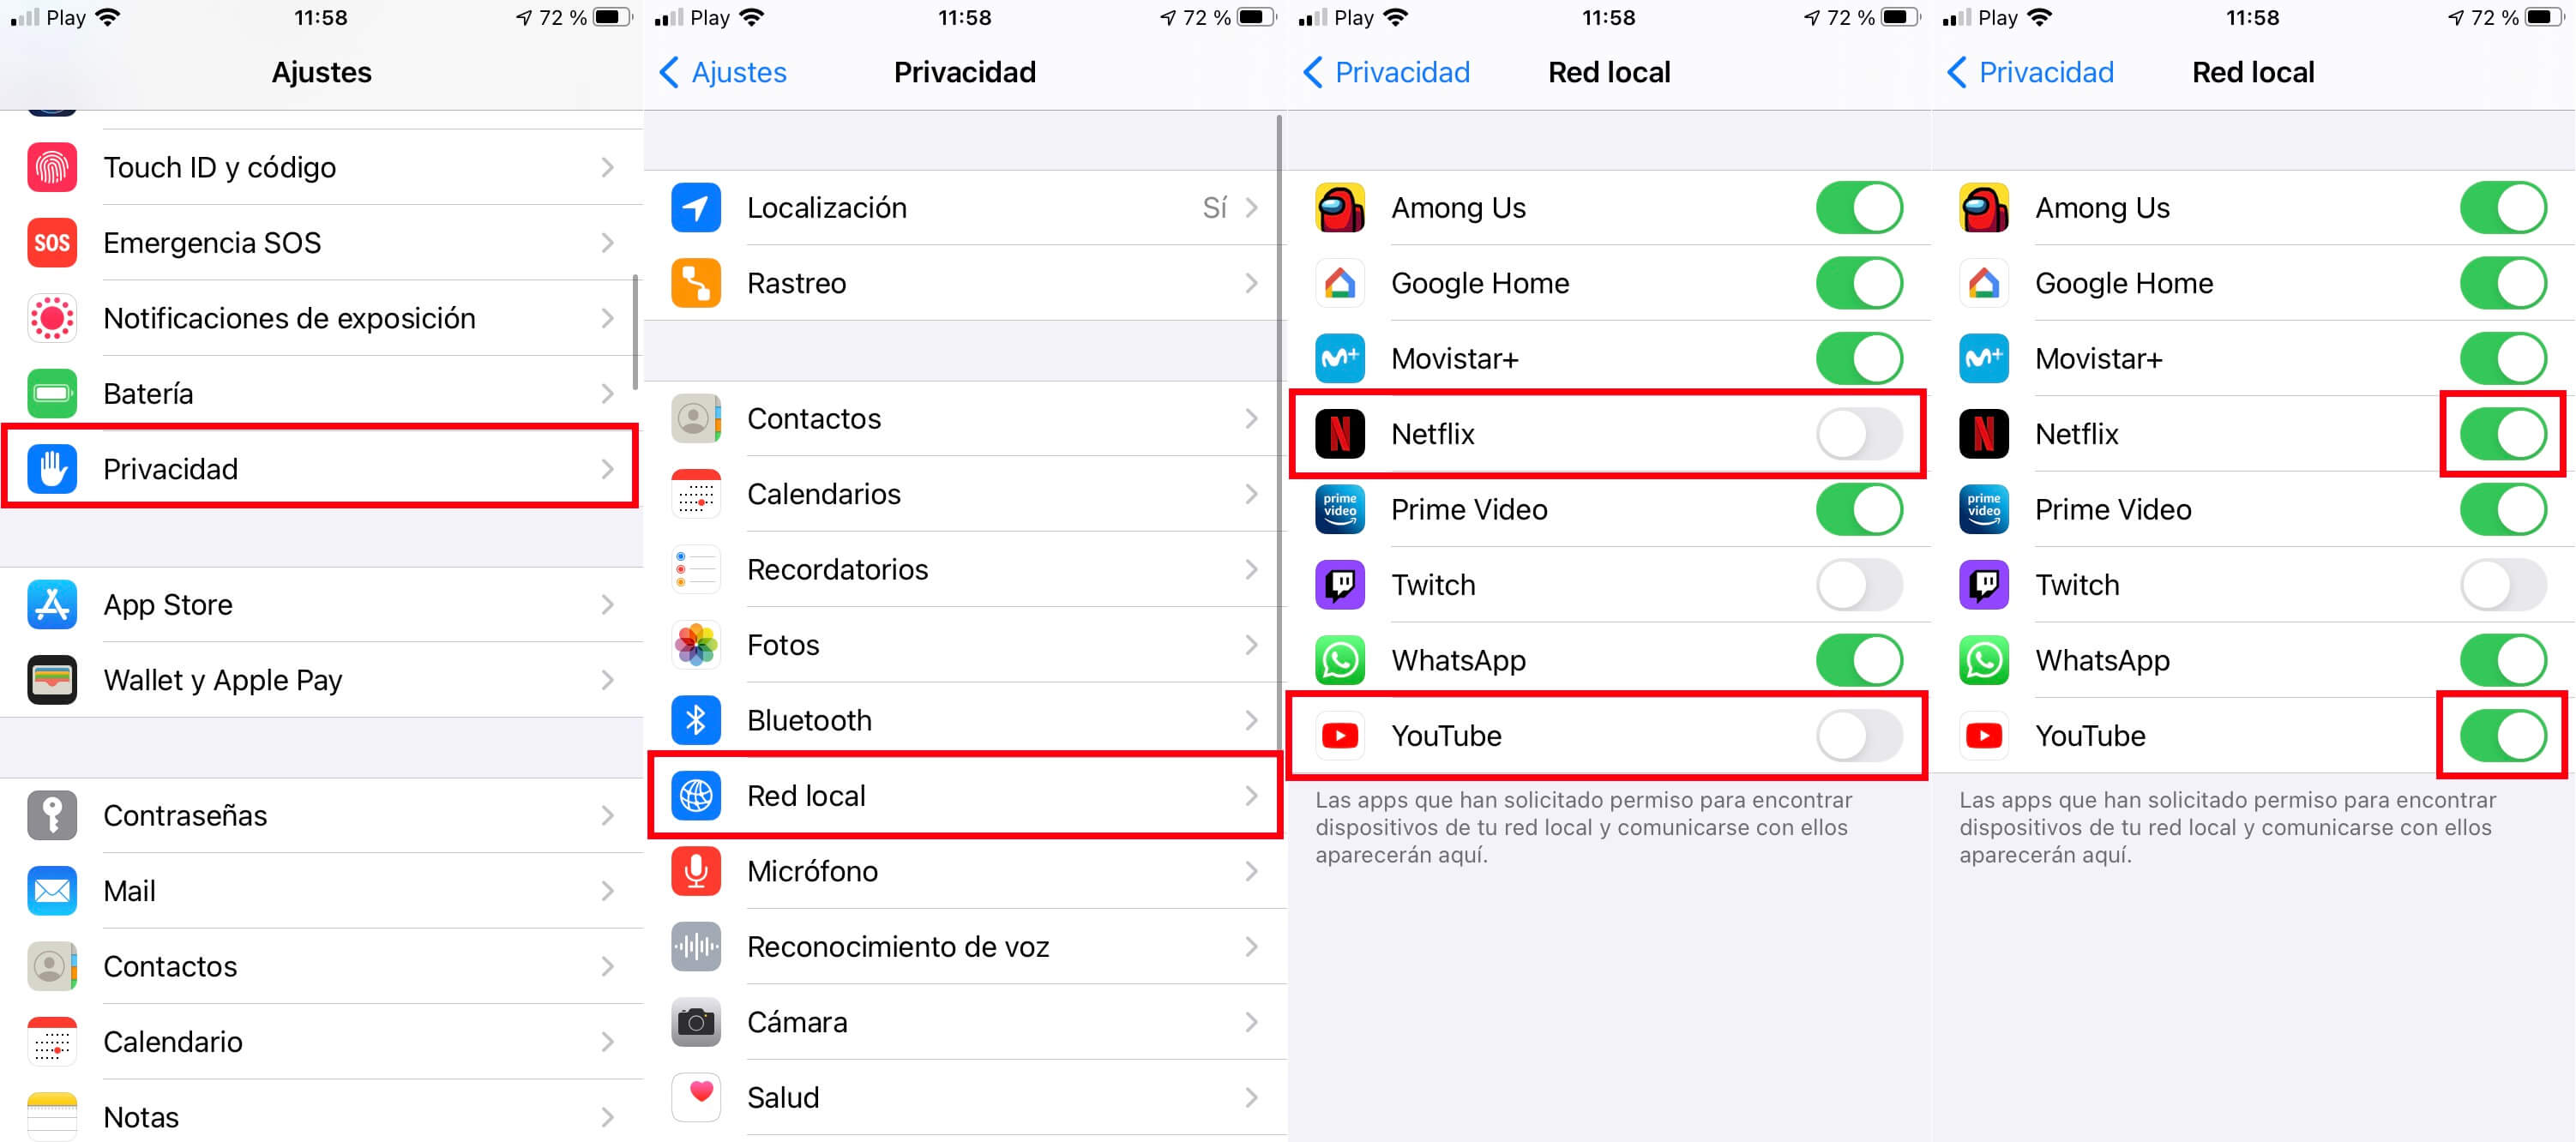 allow iphone apps to search for other devices on the same local network